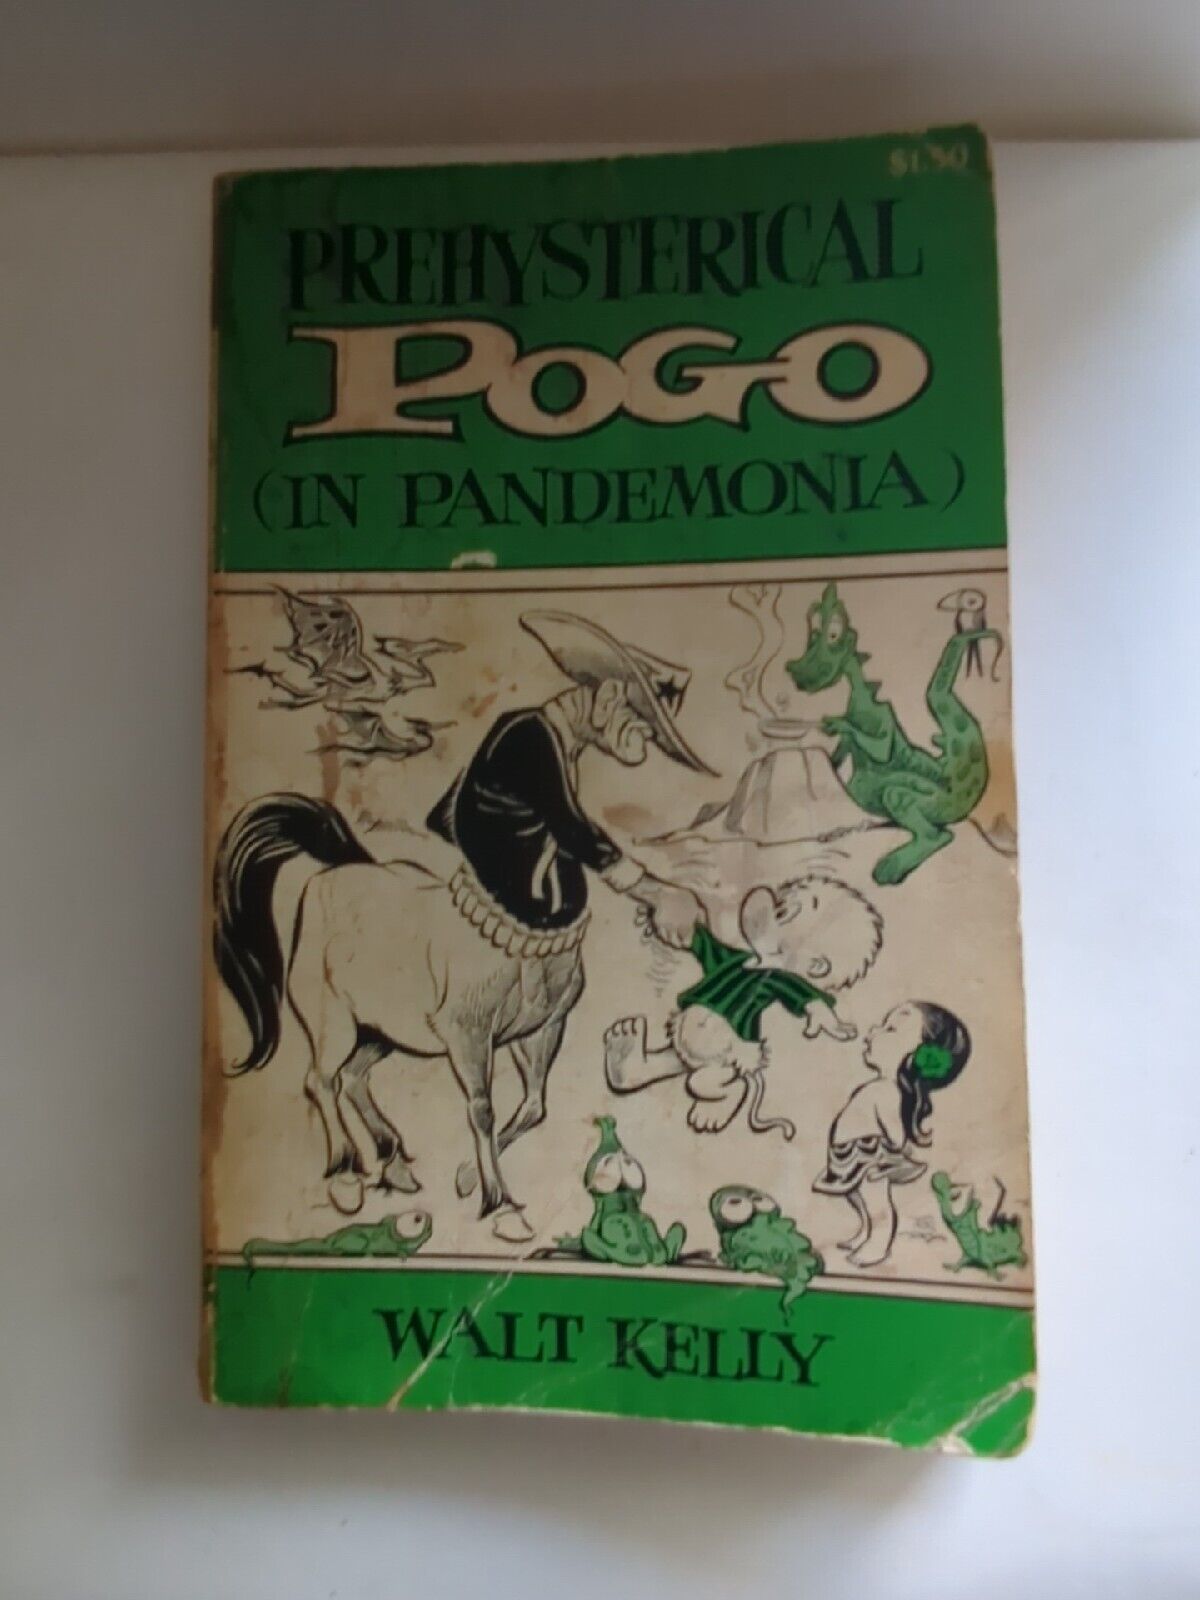 1967 Prehysterical POGO (In Pandemonia) 1st First Edition Printing Walt Kelly